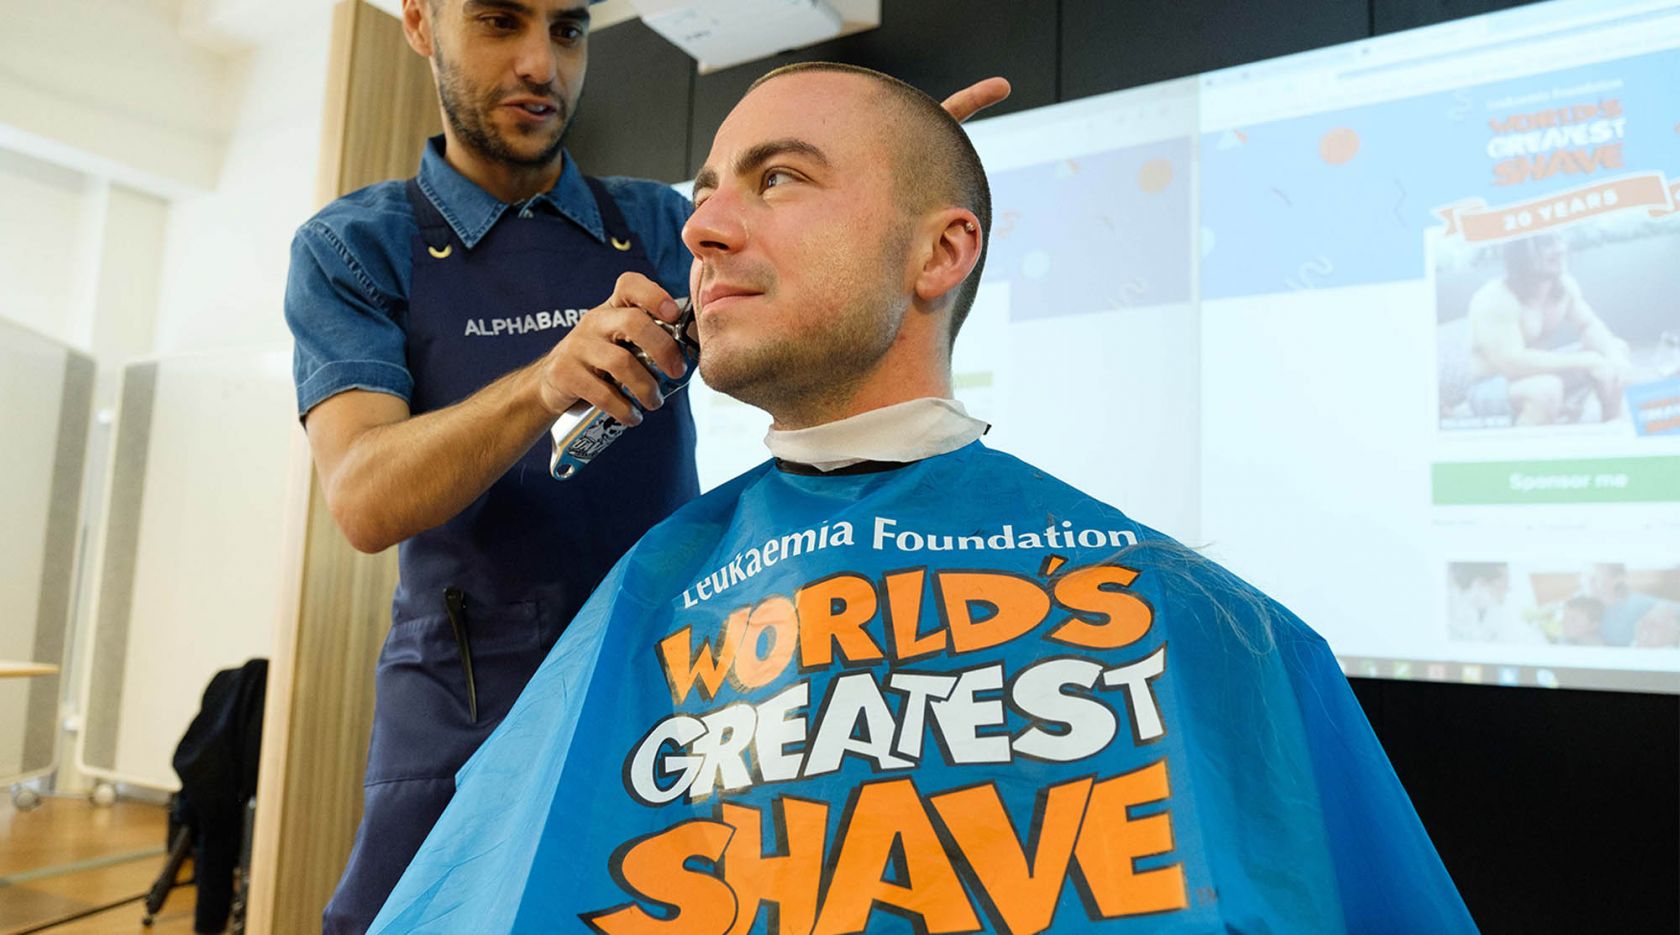 worlds greatest shave 2018 christopher schiavello charity construction social responsibility